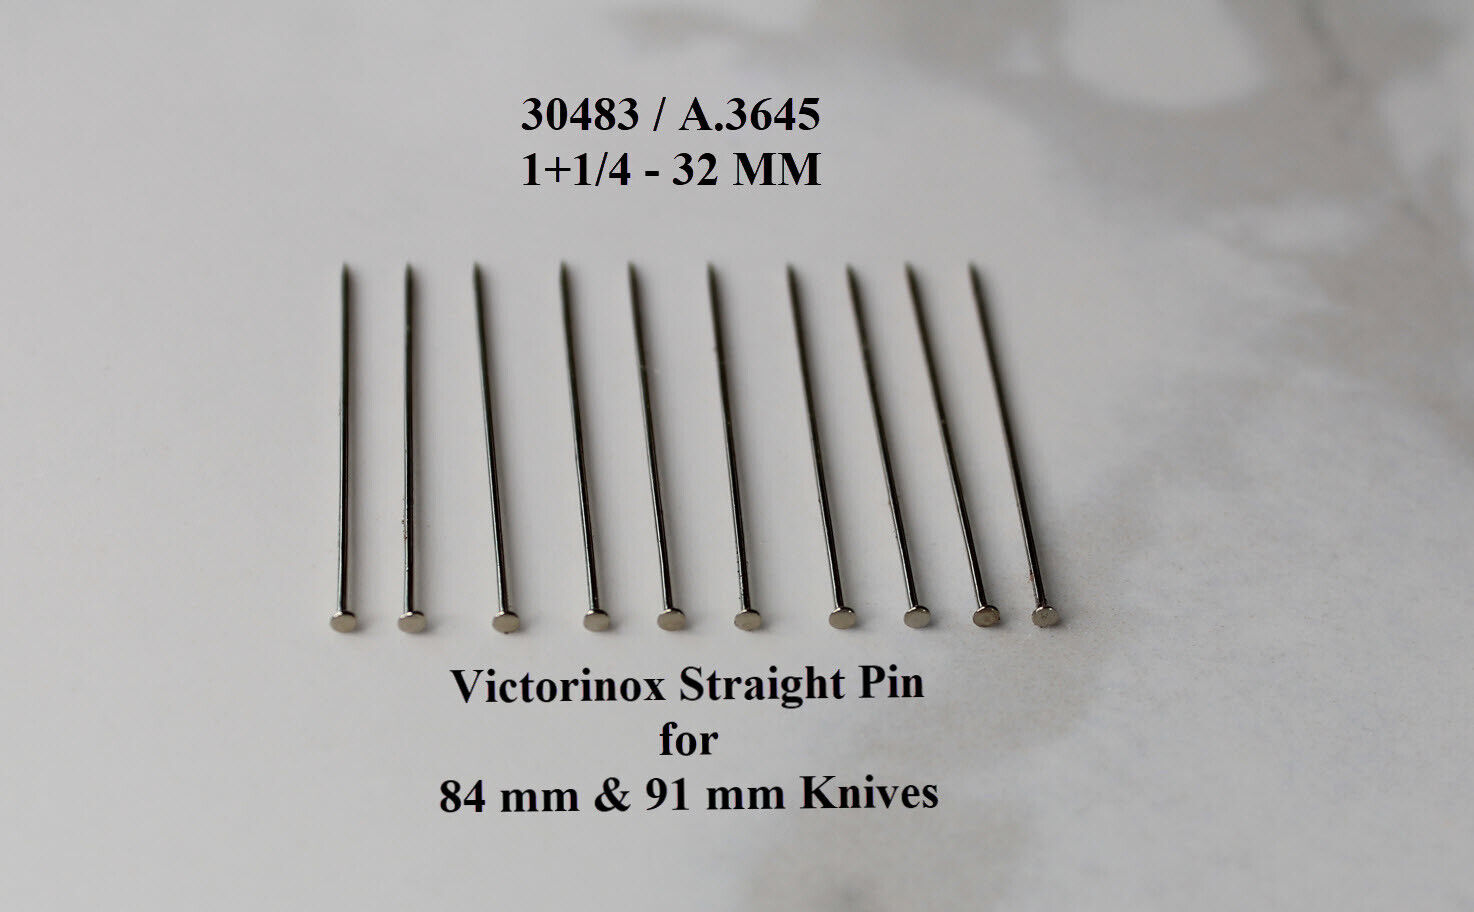 Lot 10 Replacement Upgrade Stainless Straight Pins Victorinox 84mm/91mm Knives Fits Victorinox Swiss Army Knife 30483 / A.3645 Replacement - фотография #2